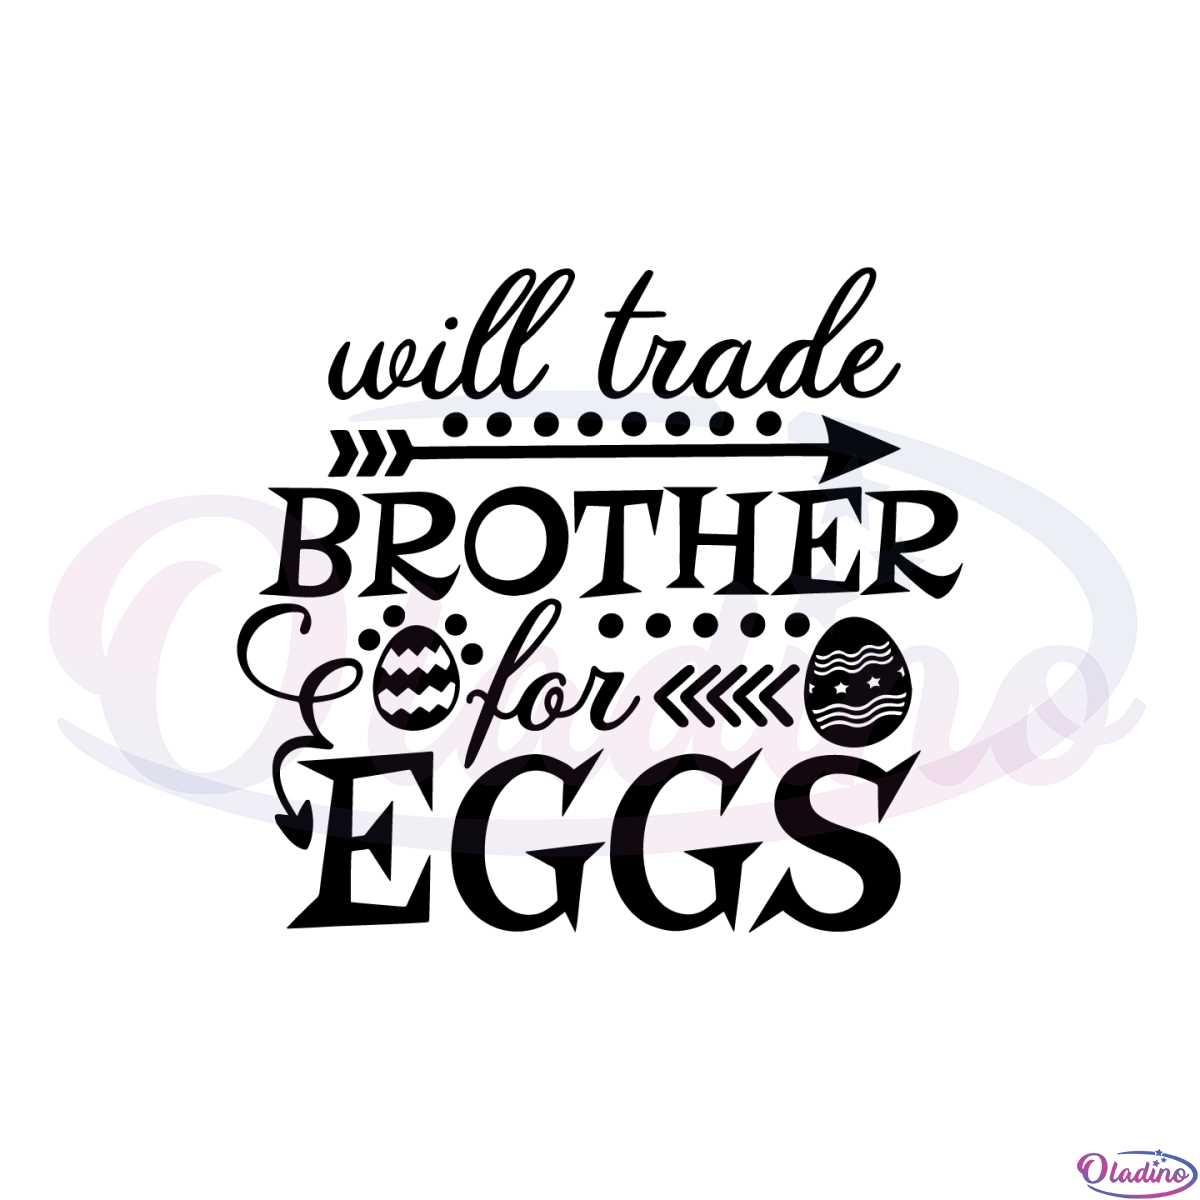 will-trade-brother-for-eggs-funny-easter-egg-svg-cutting-files